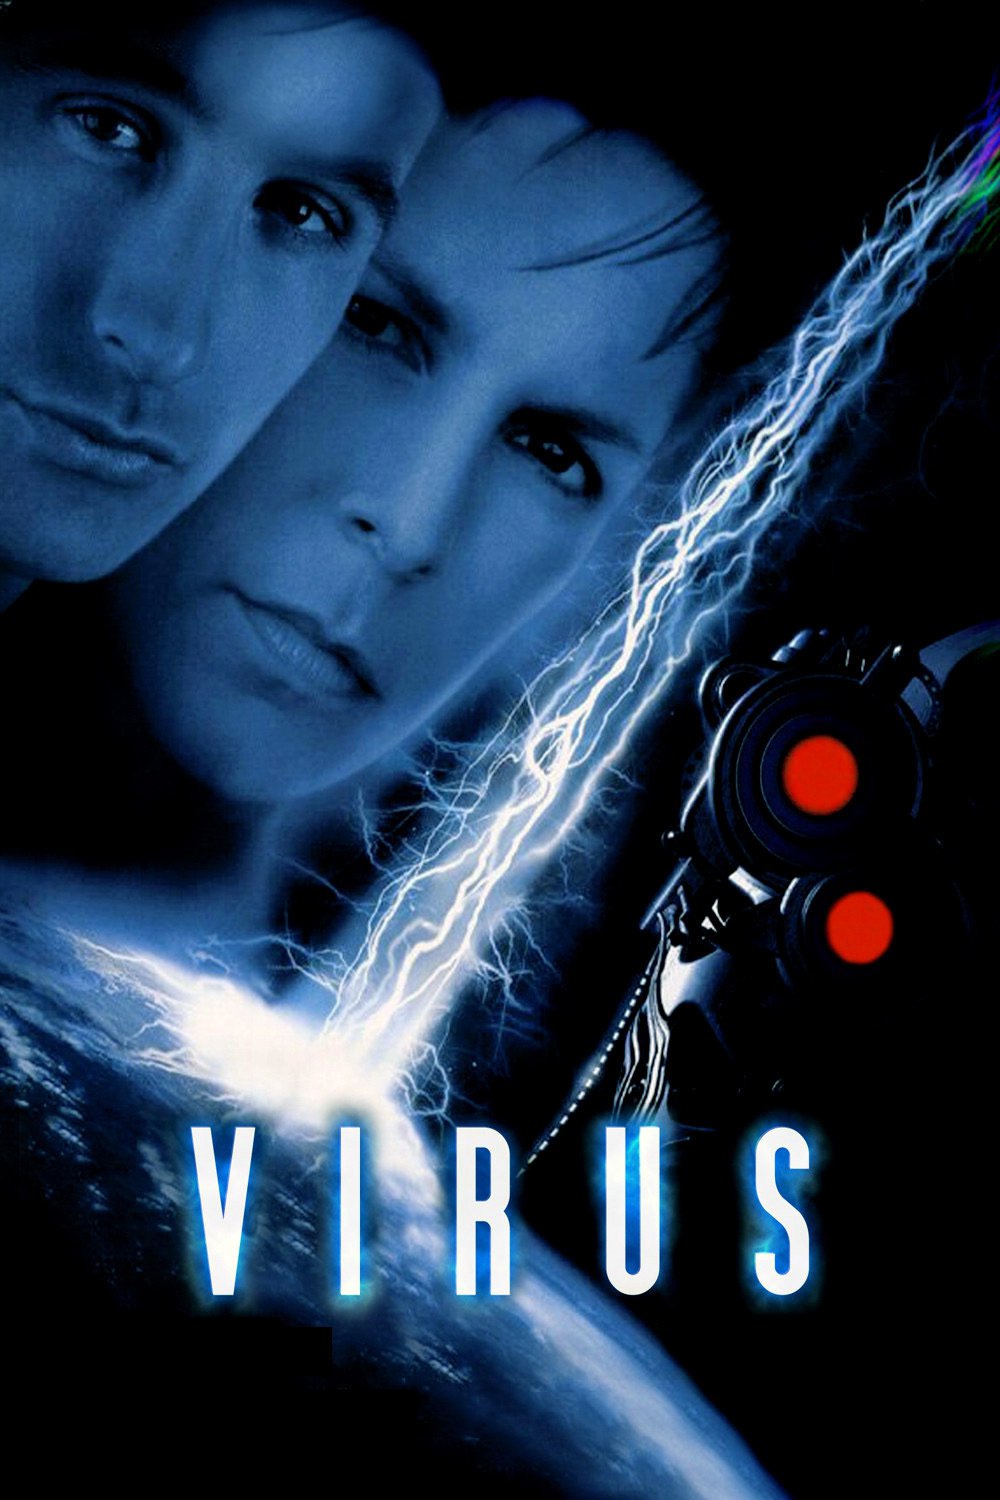 Poster for the movie "Virus"